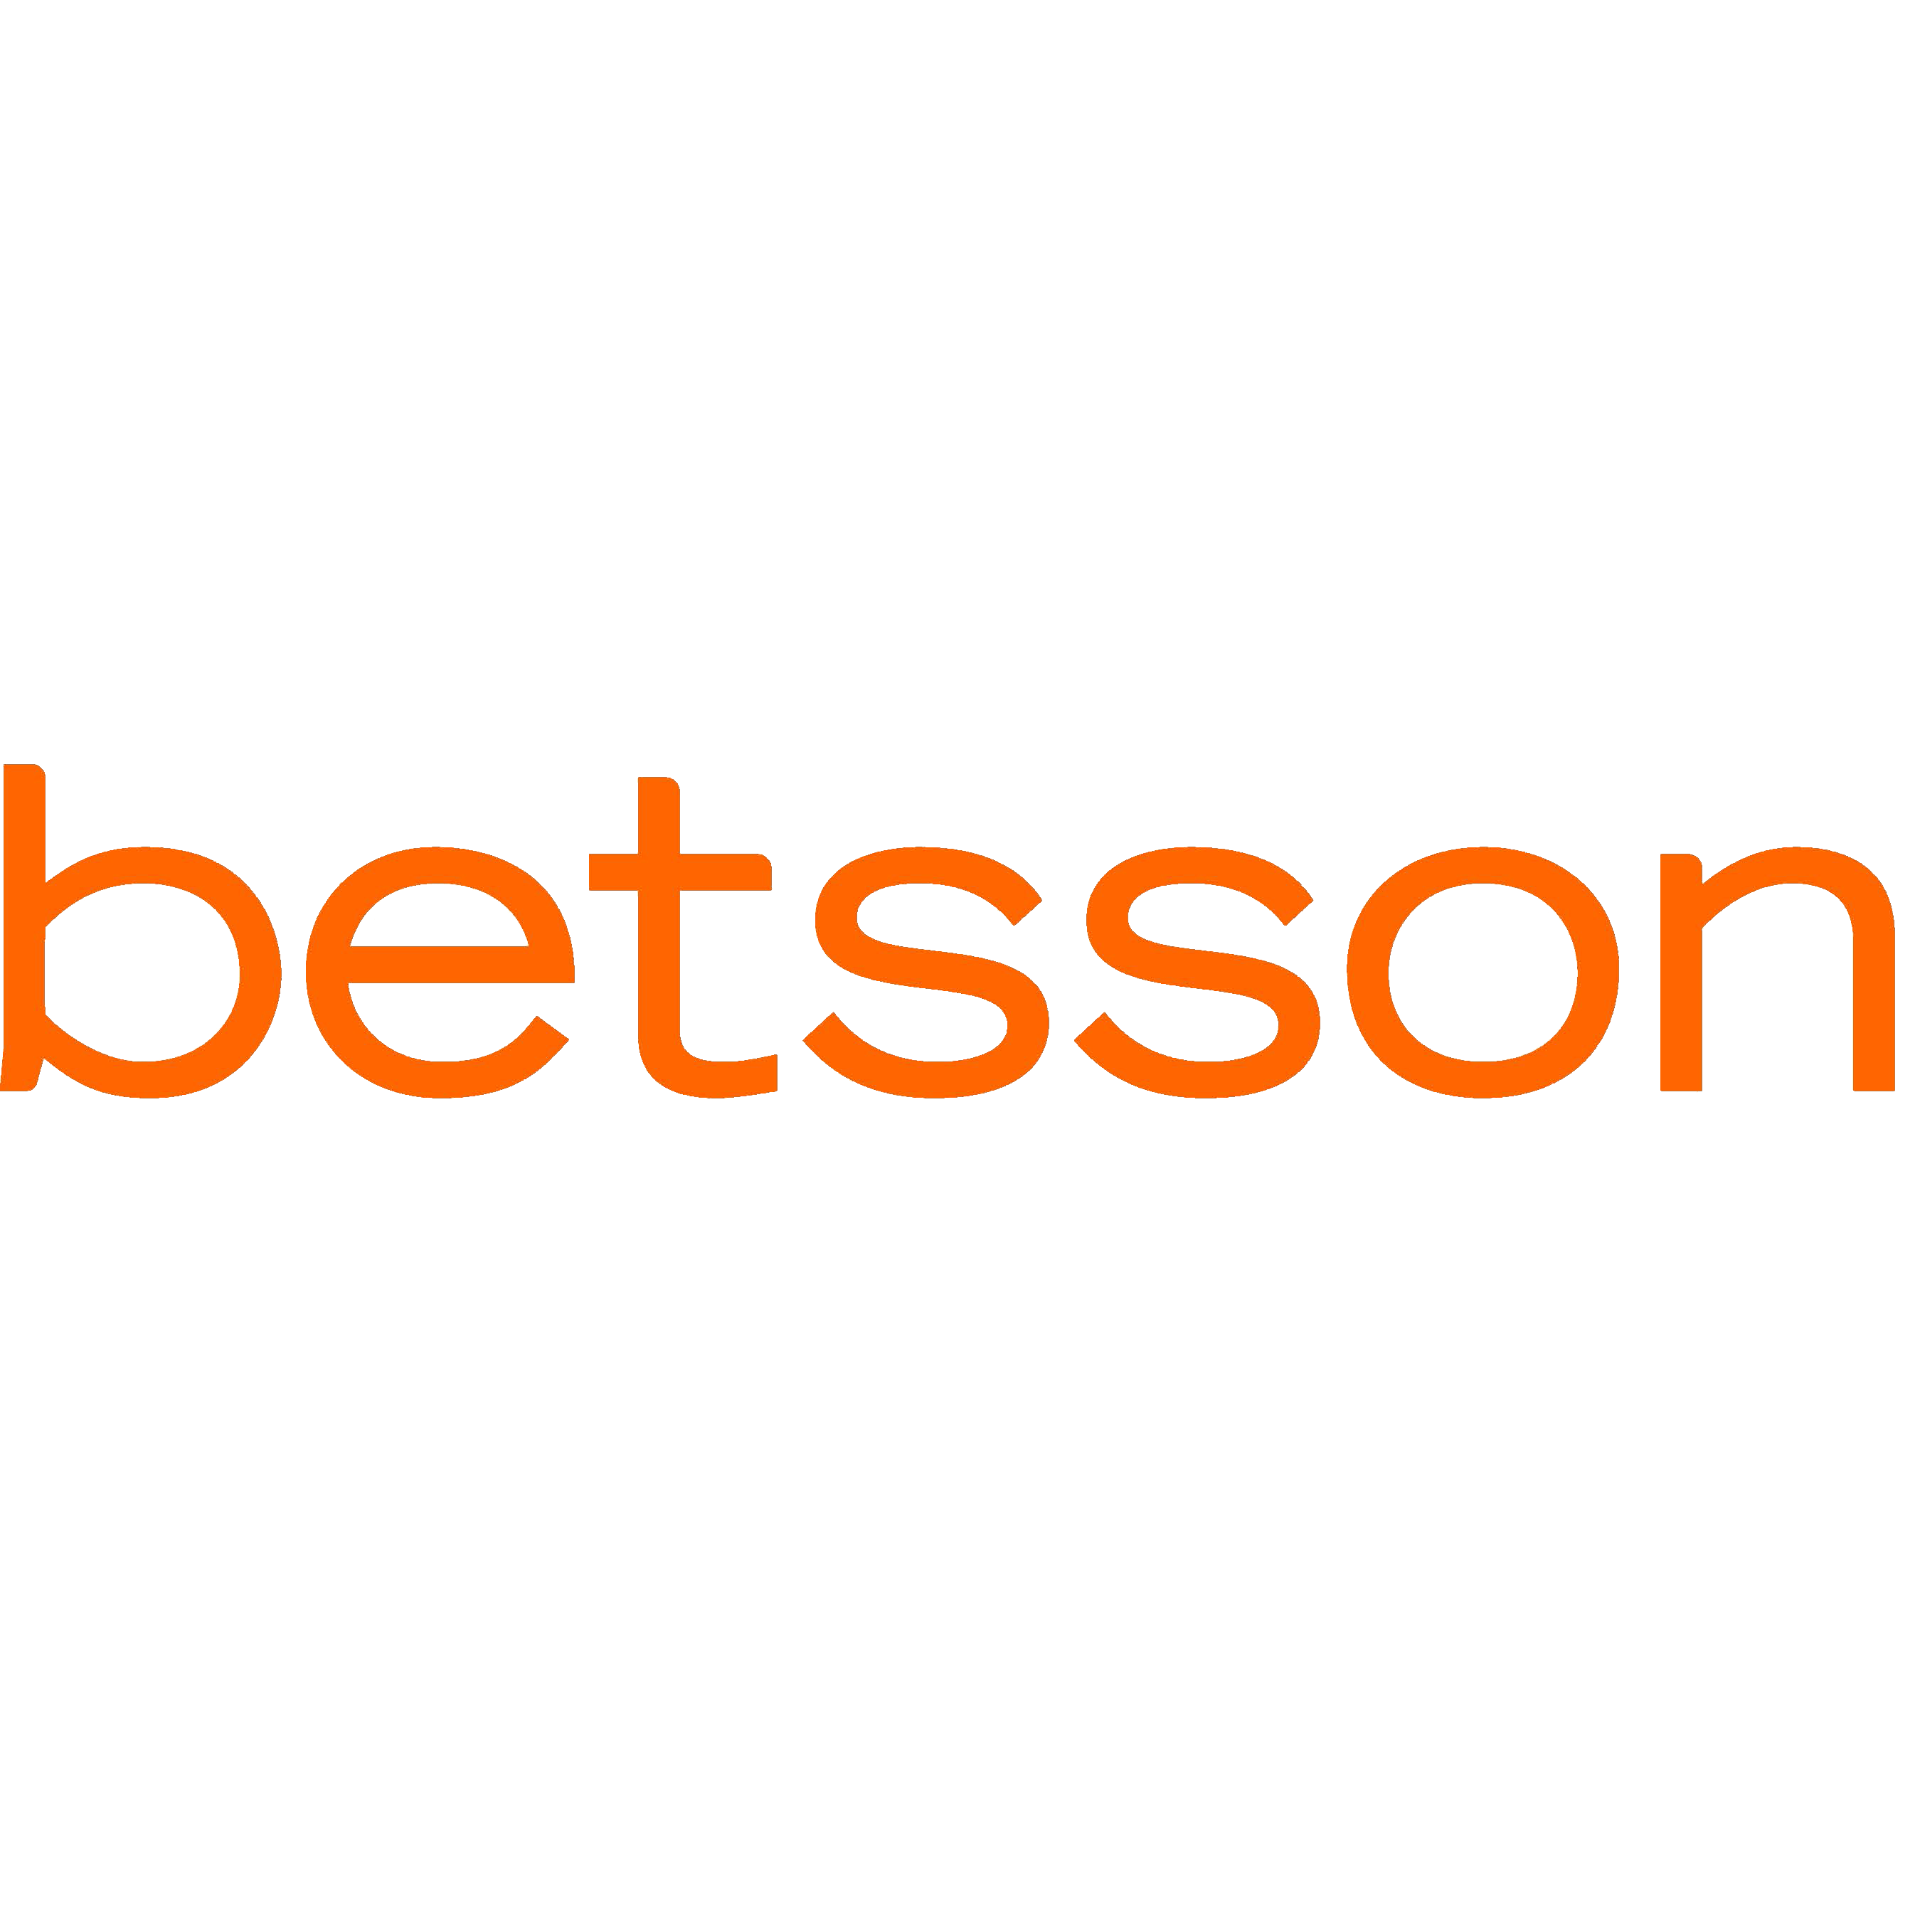 Betsson.png